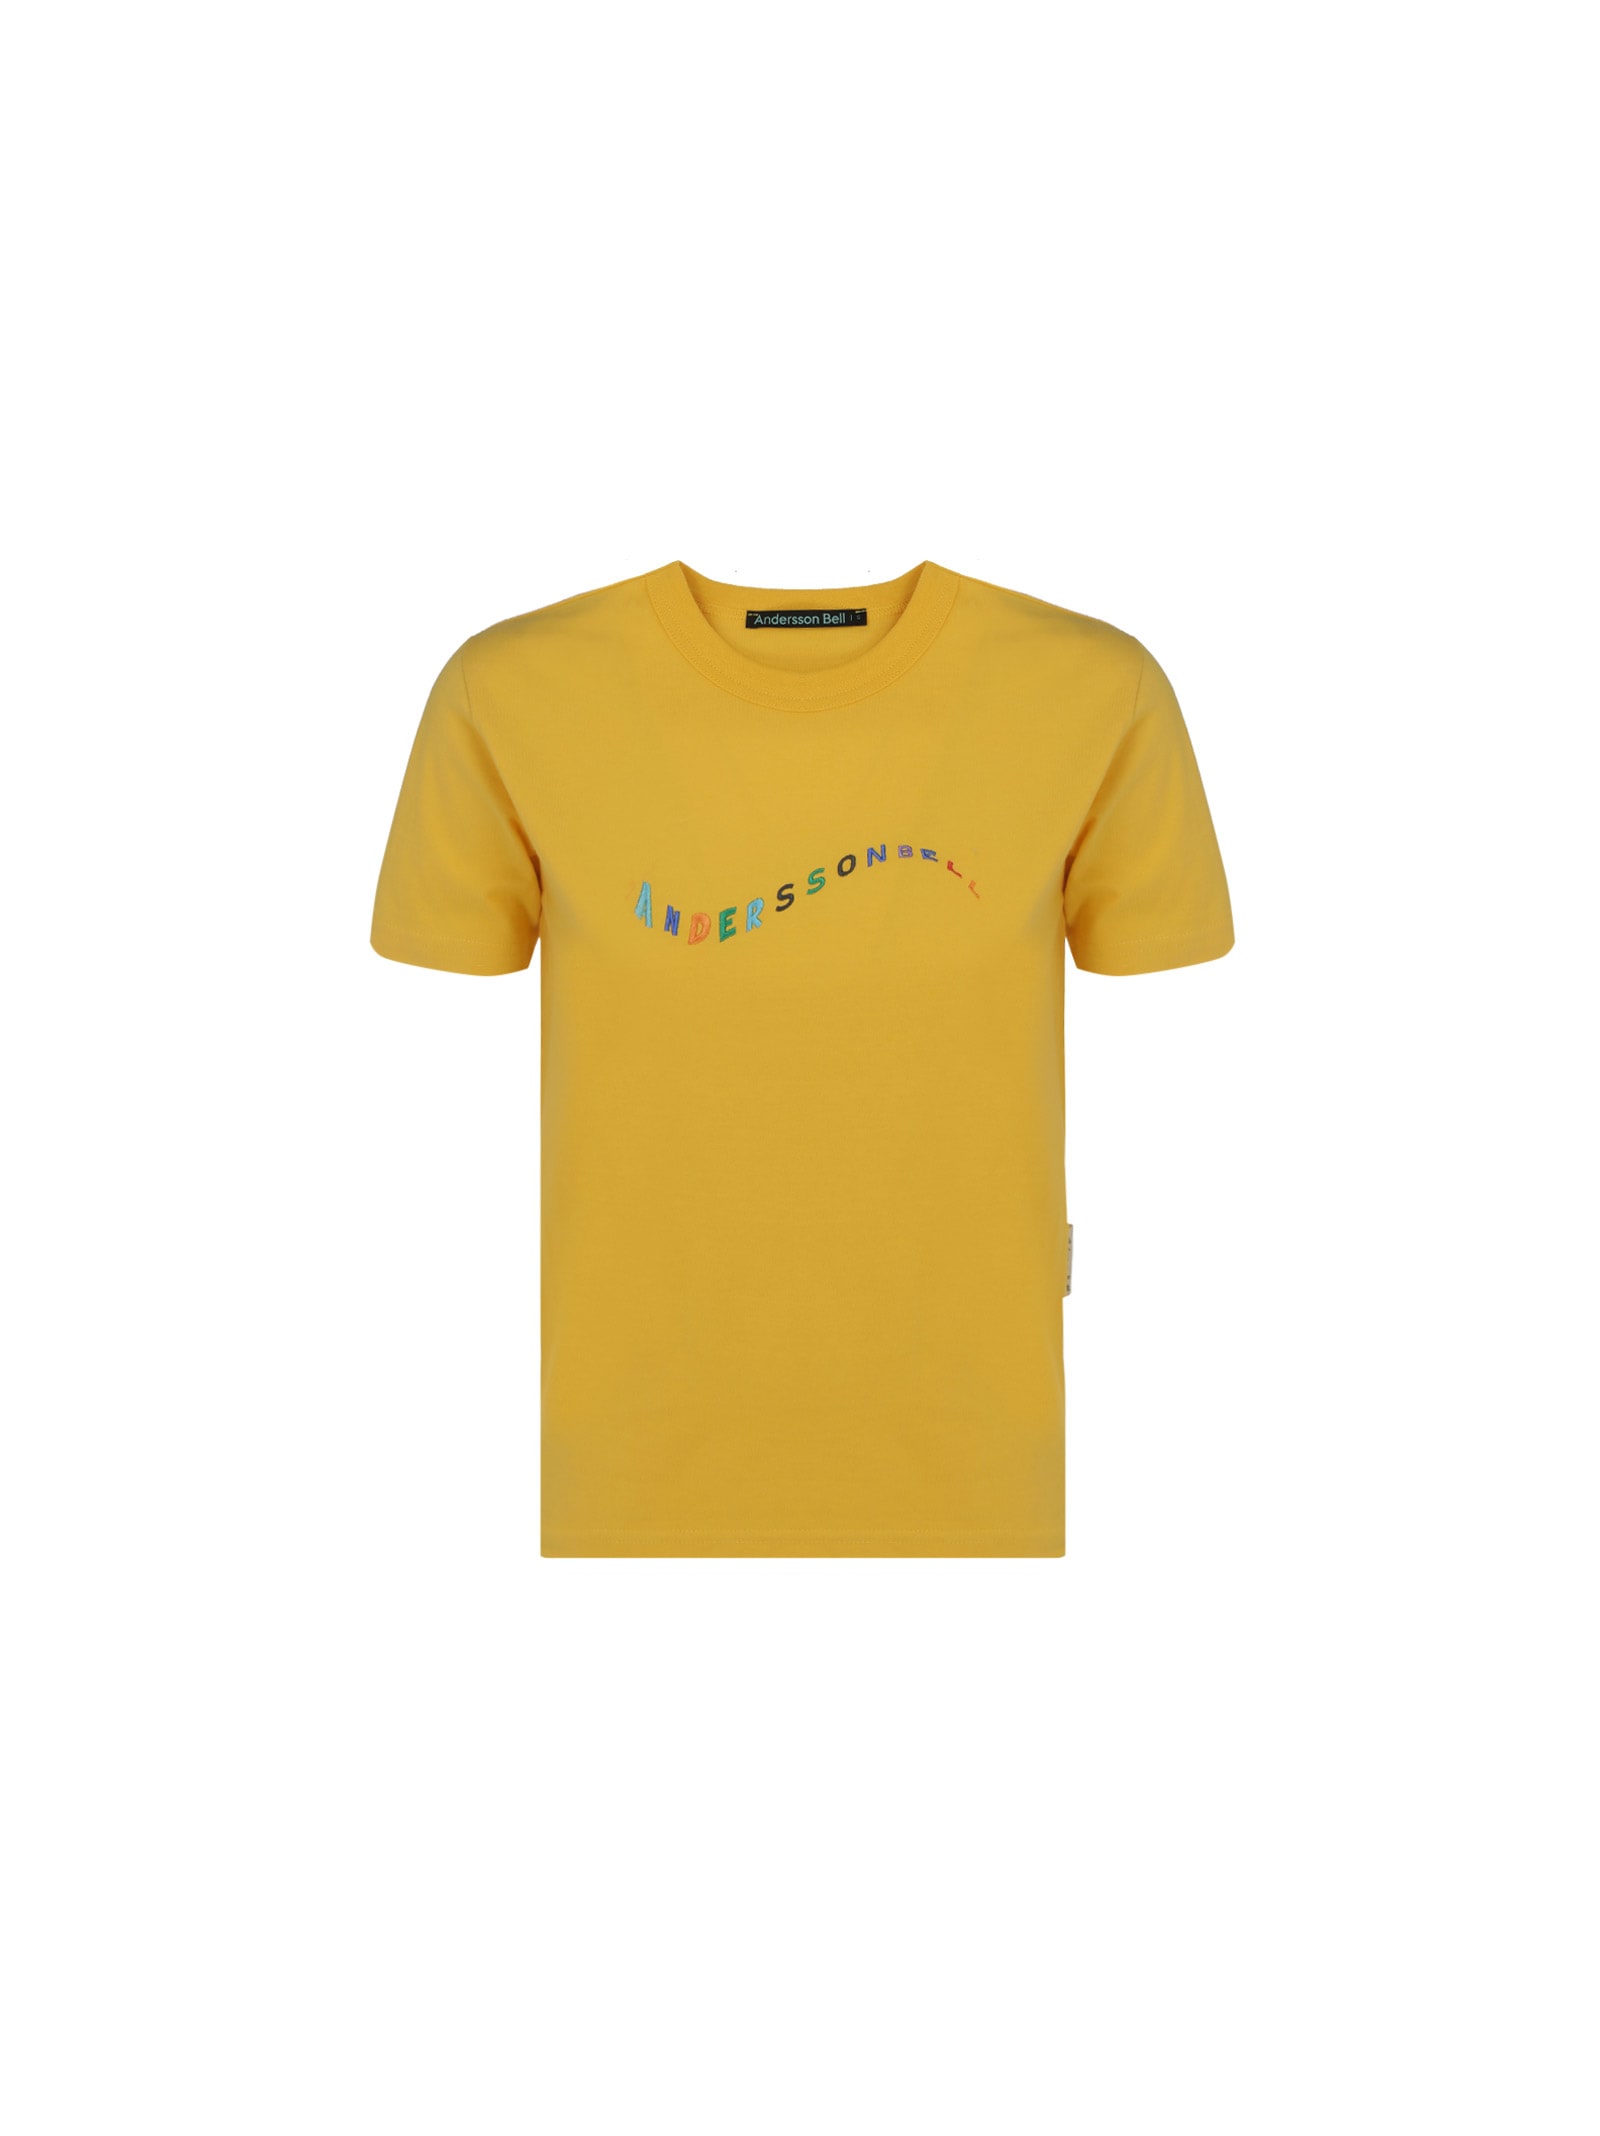 ANDERSSON BELL T-Shirts | ModeSens